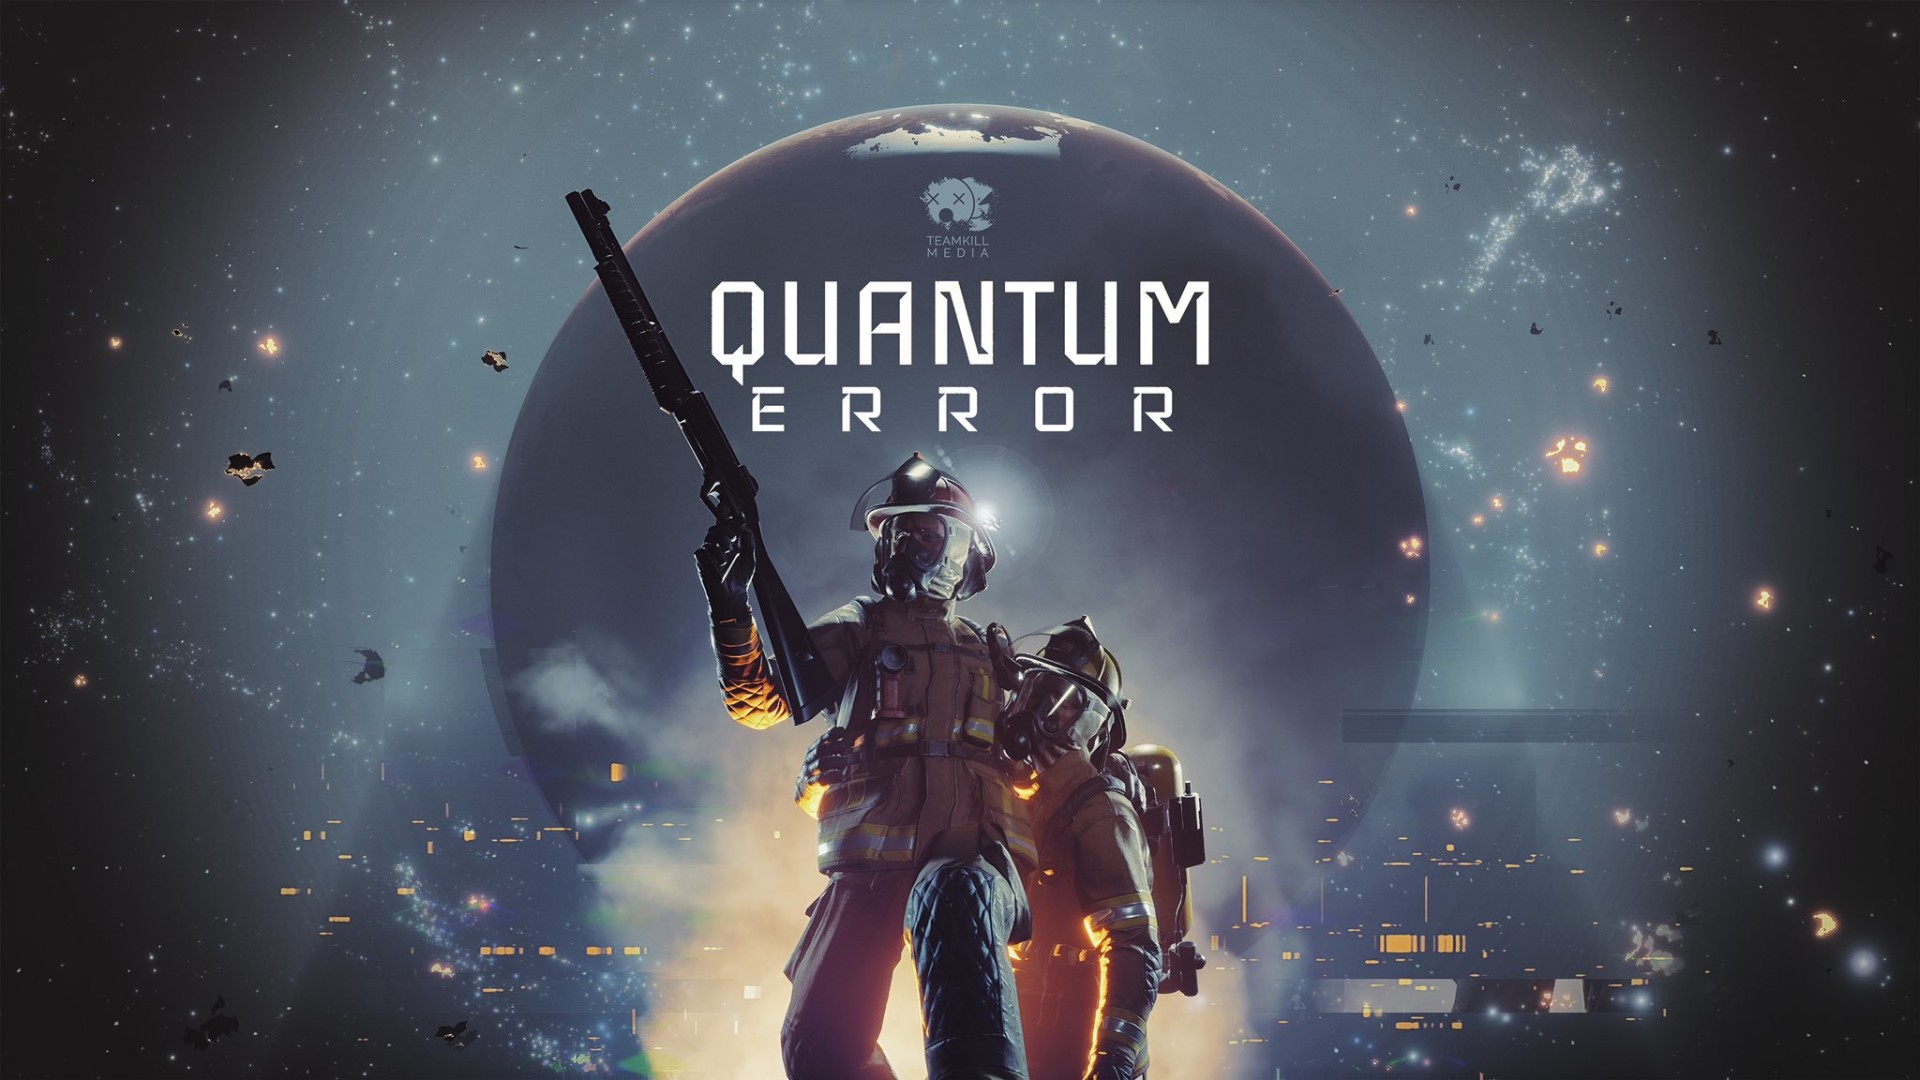 Quantum Error Will Launch Later on Xbox Series X/S Due to “Slower” SSD